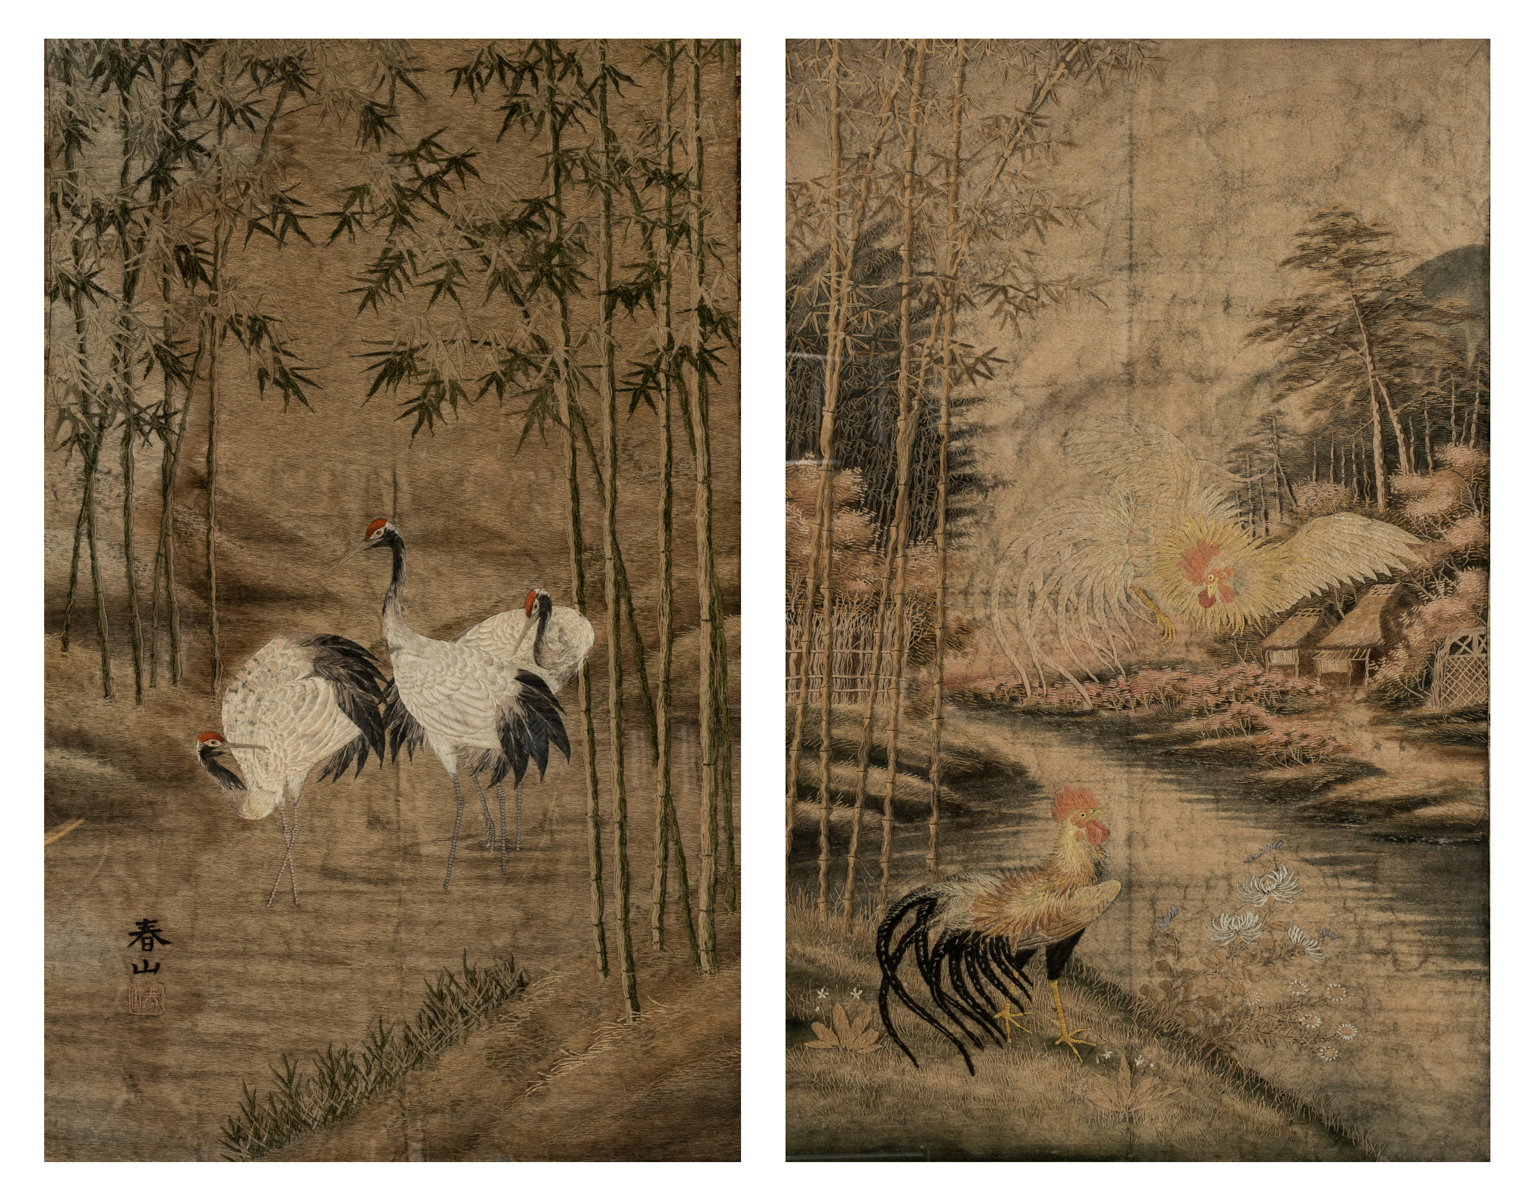 Two Japanese embroidered tapestries, one depicting cranes in a river landscape and one depicting coc